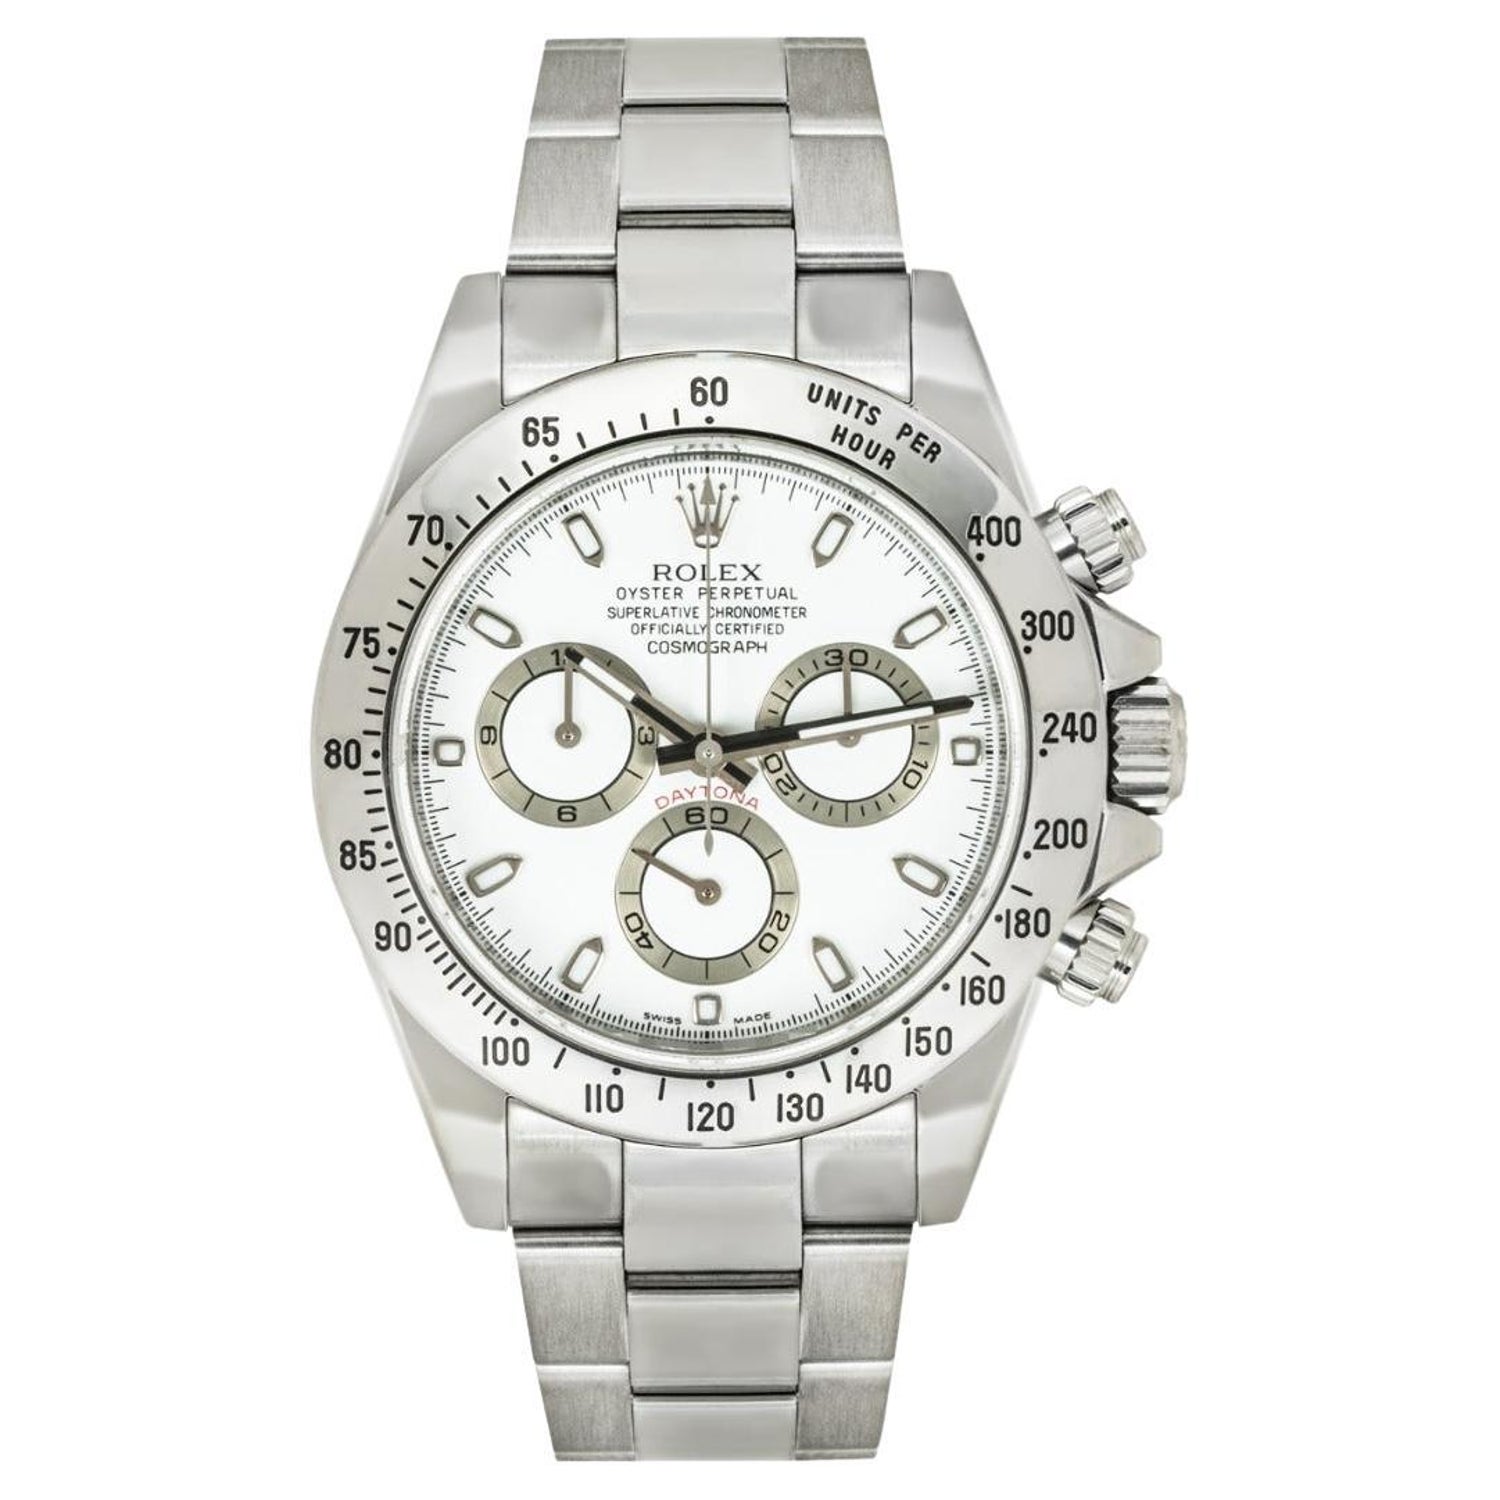 Rolex Daytona 16520, White Dial, Certified and Warranty at 1stDibs | rolex  daytona 1992 winner 24 455b, rolex daytona 455b, rolex ad daytona 1992  winner 24 455b 16520